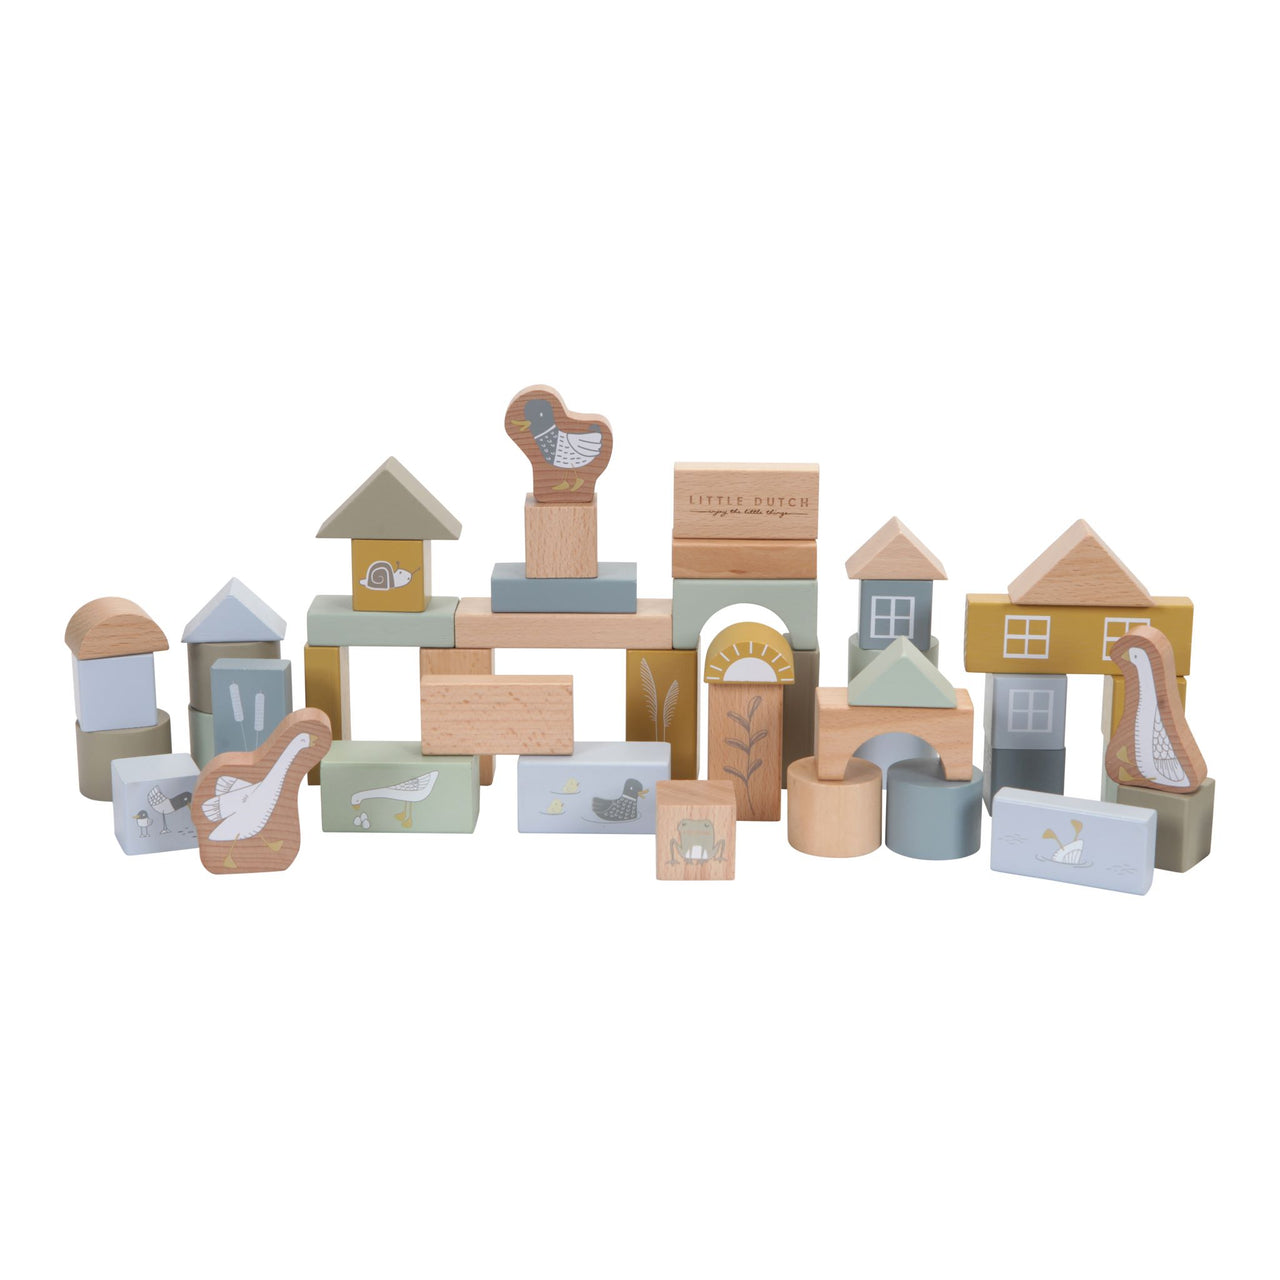 These wooden building blocks from little dutch are an all-time family favourite. The bucket contains no less than 50 wooden blocks in in various shapes and sizes, decorated with Little Goose and his friends from the countryside. Stack the blocks to build fun shapes or towers. The blocks guarantee a lot of building fun and can be stored effortlessly in the bucket! 